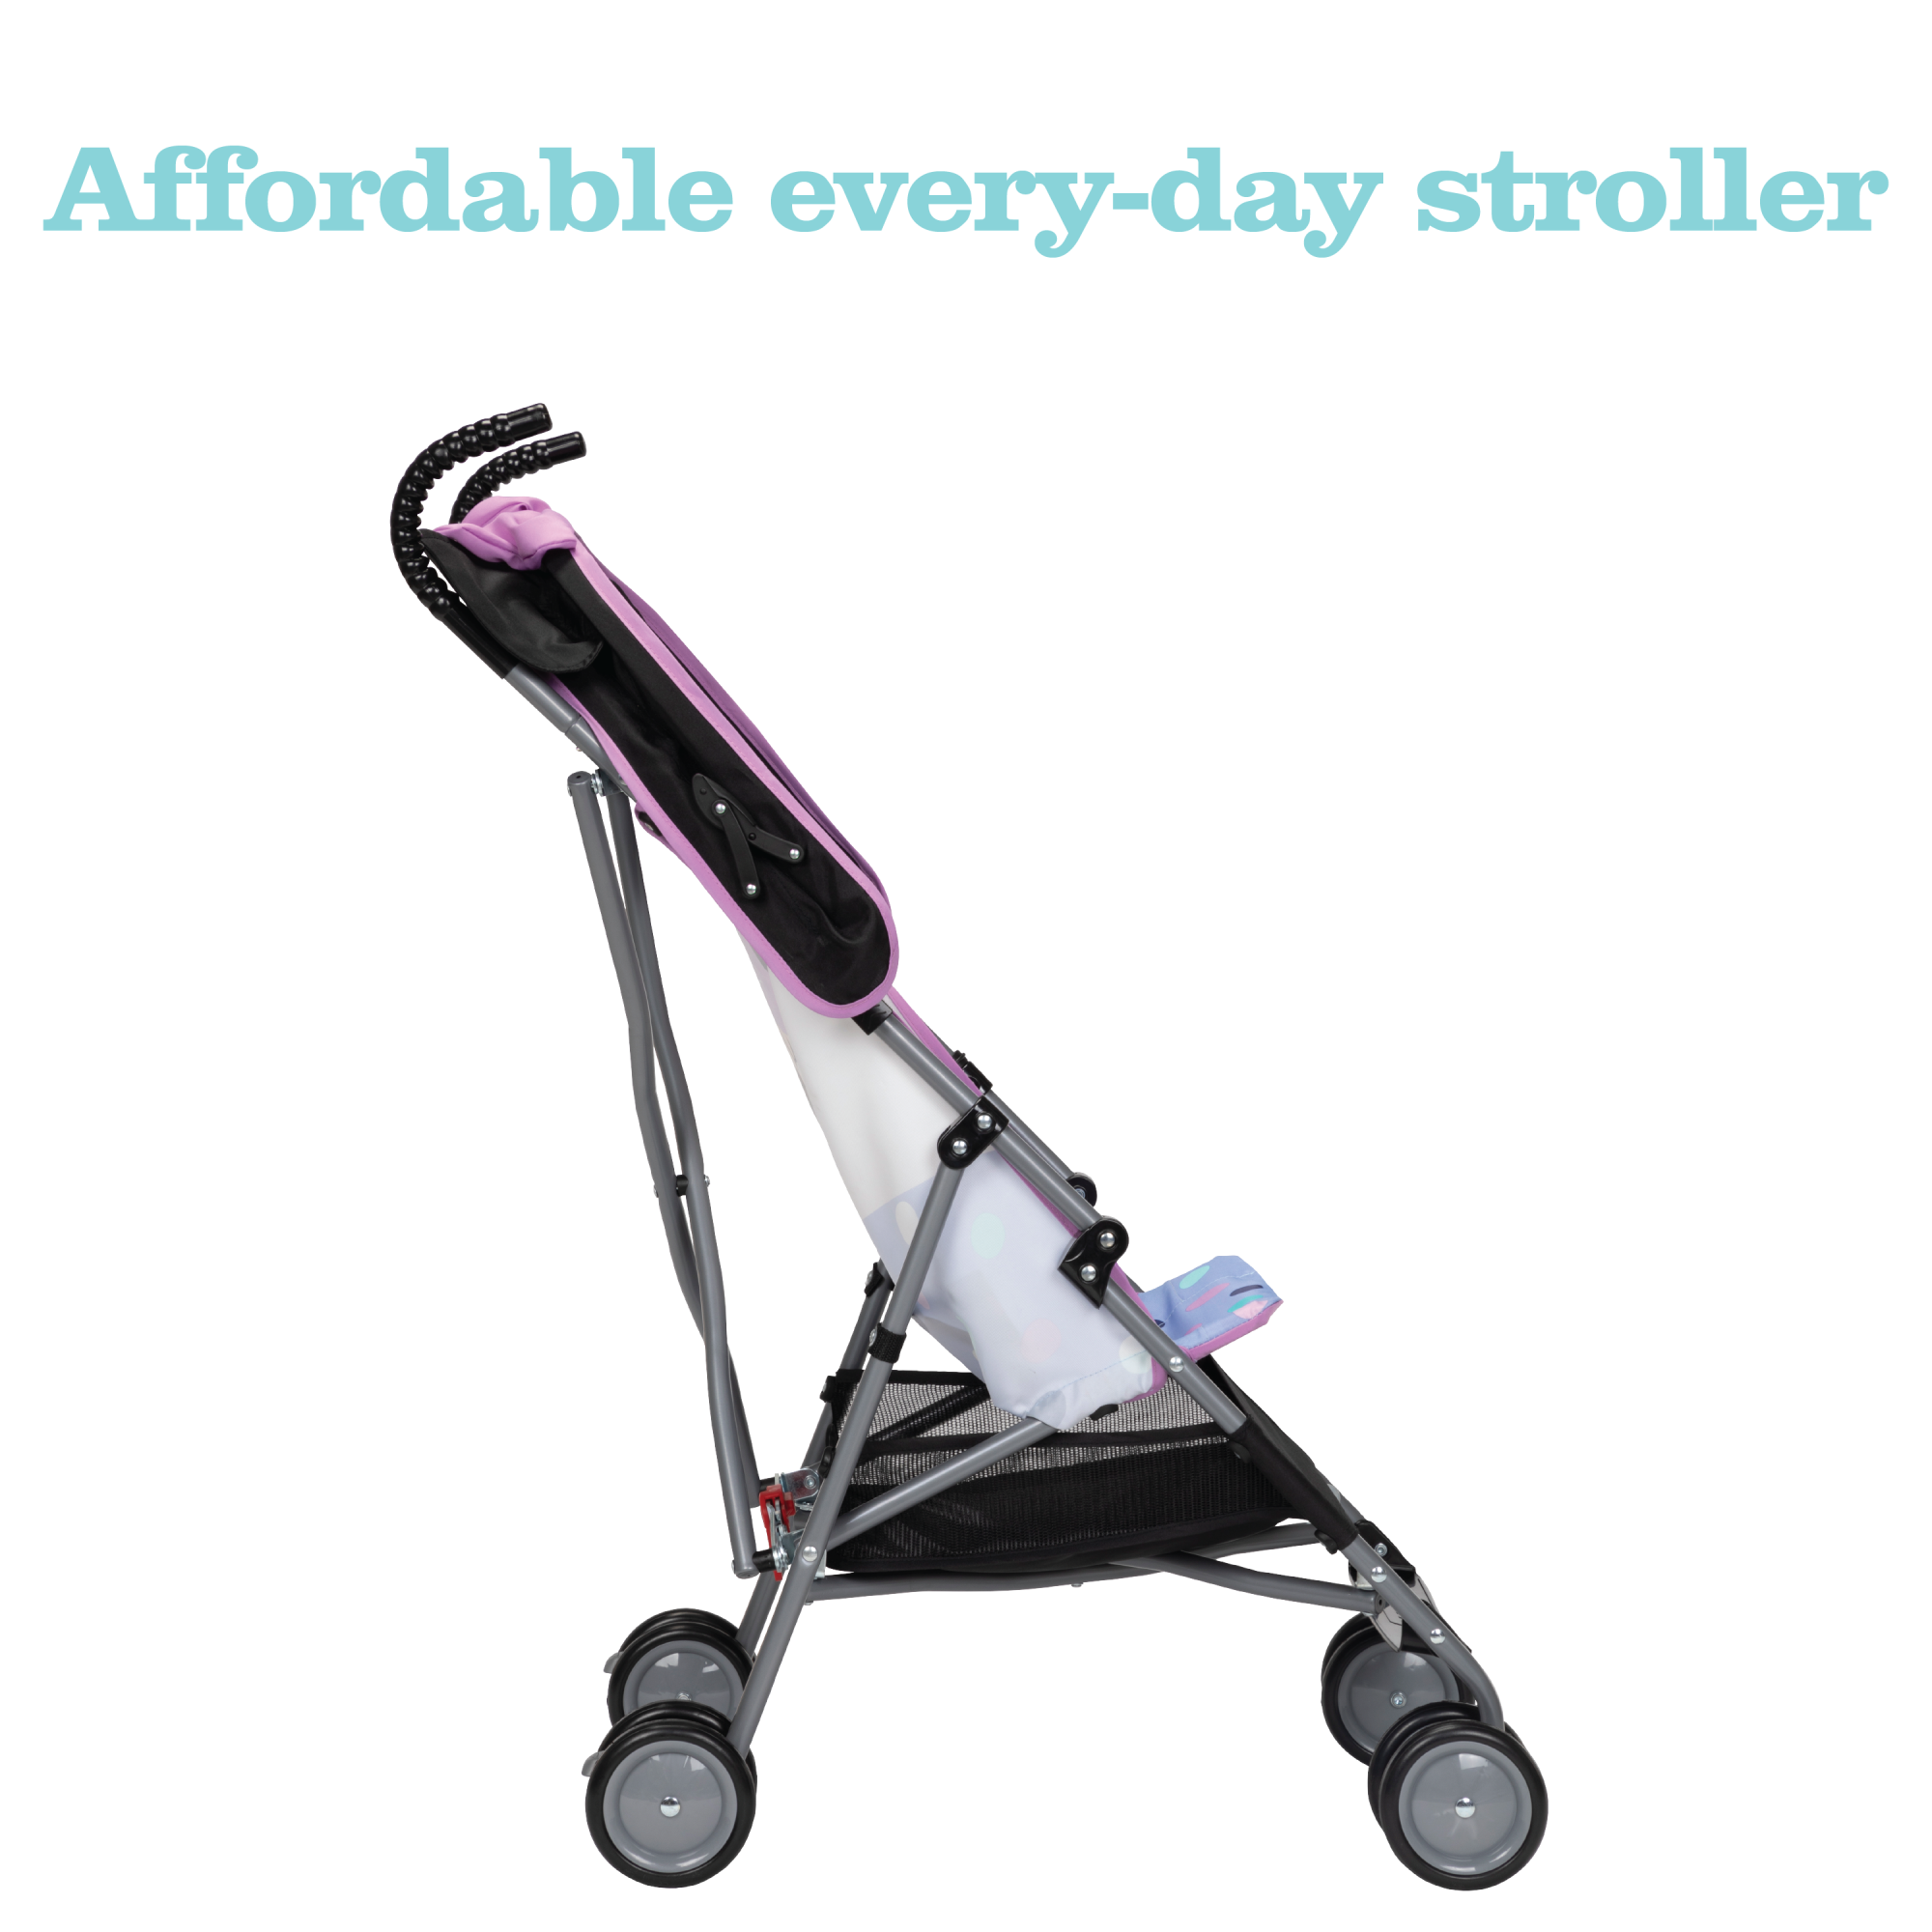 Disney Baby Character Umbrella Stroller - affordable every-day stroller